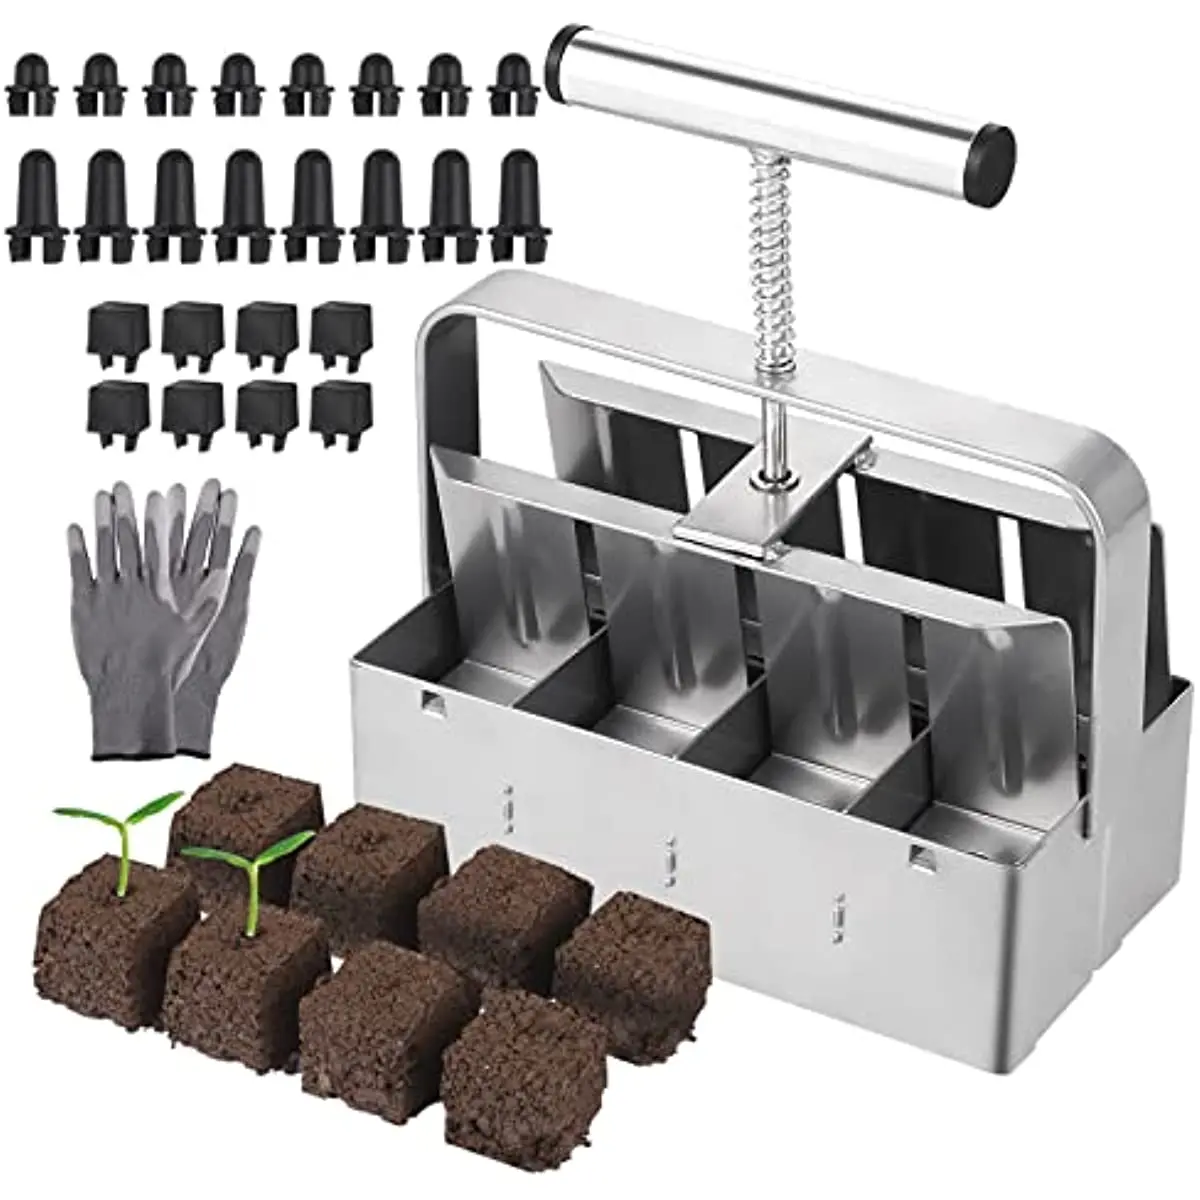 Soil Block Maker 8 Cell Hand Held with Garden Gloves 2 Inch Molds Soil Blocking Tool Protecting Seedling Transplants from Damage